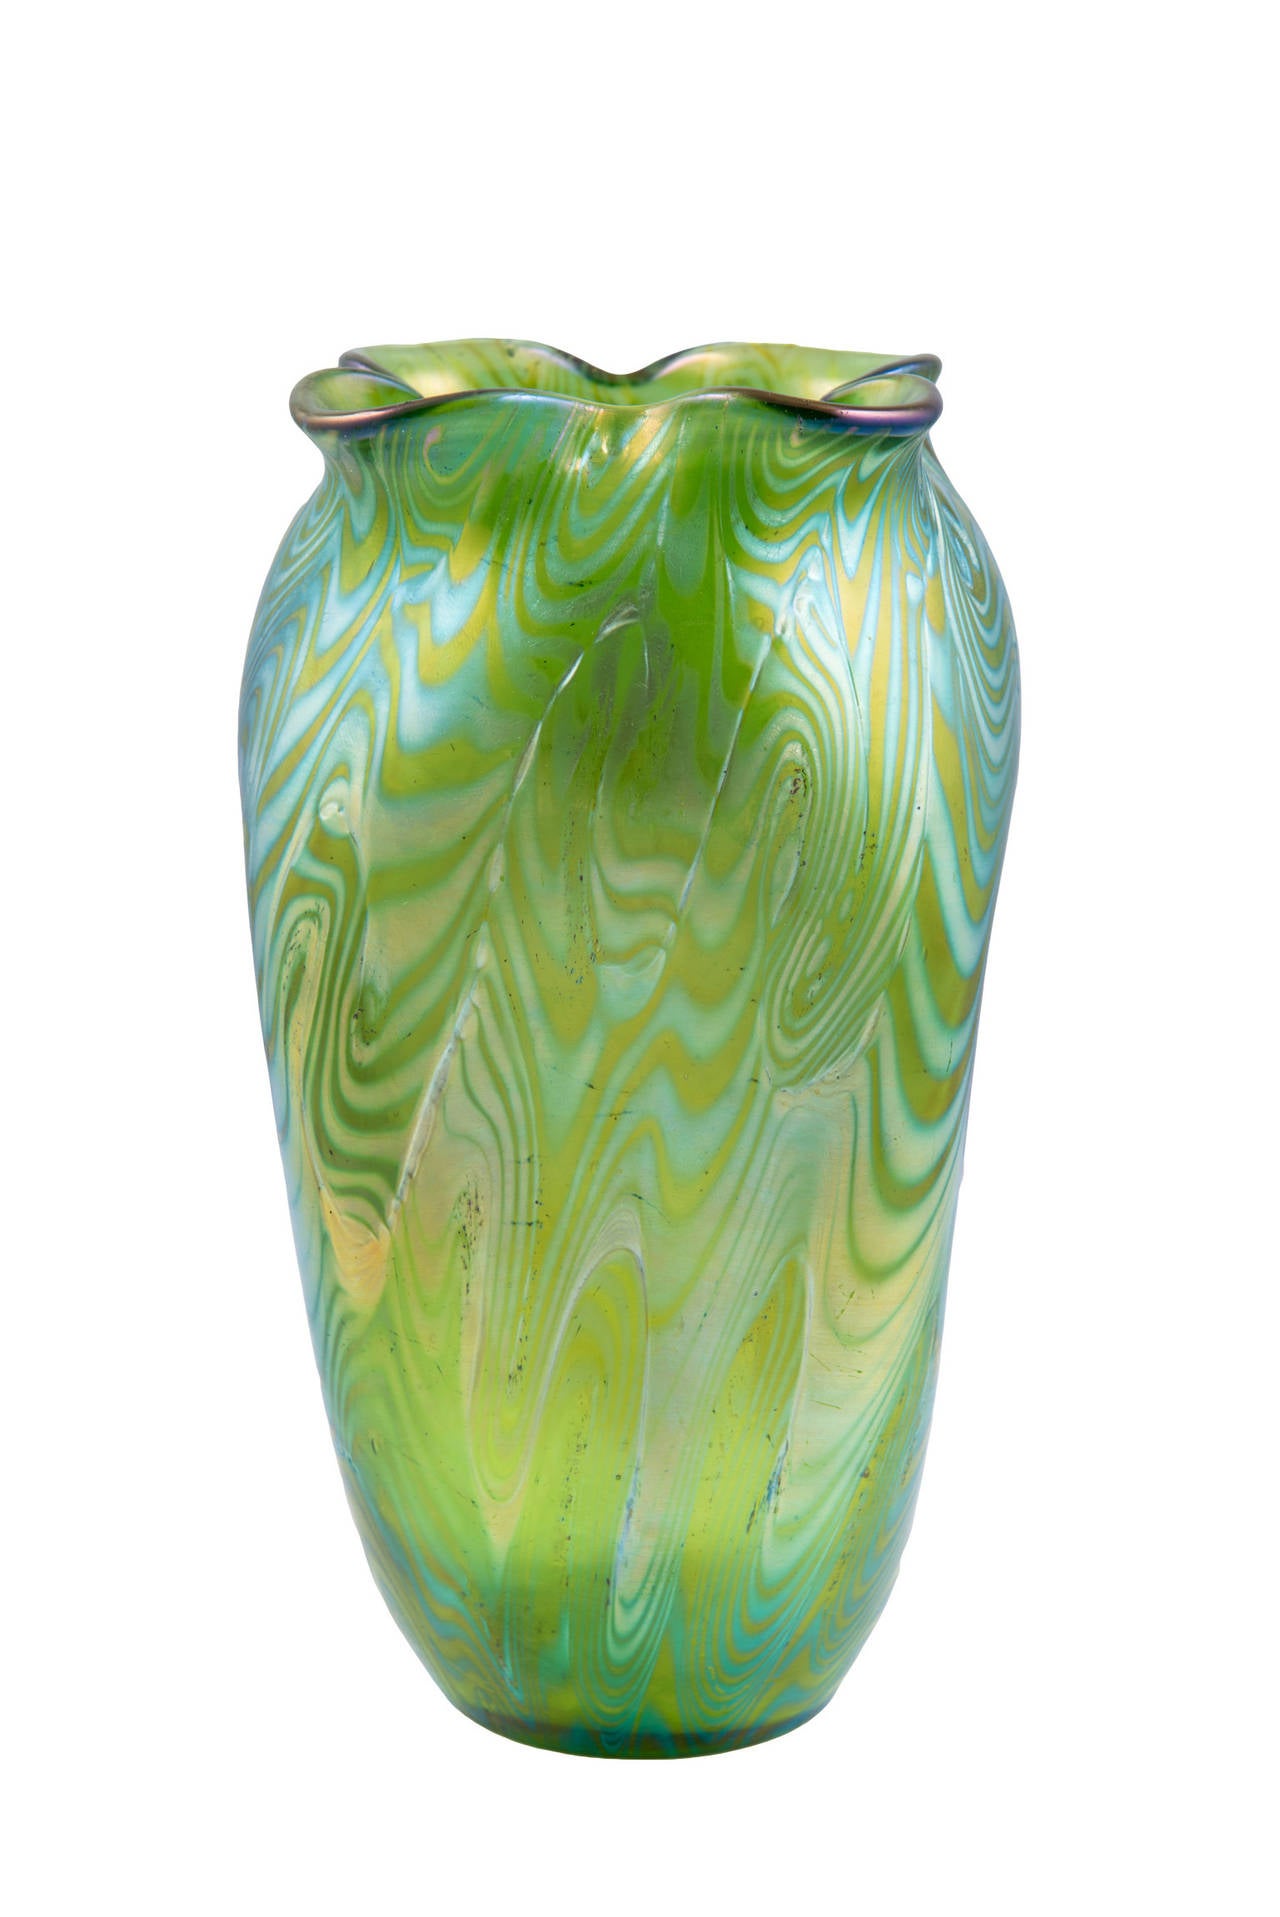 This vase shows an early example of the glass manufacture Johann Loetz-Witwe Klostermuehle. The design of the Phenomen Gre 7499/I is amongst the oldest known decoration variants and was mainly used in the years around 1900. The elegant Jugendstil